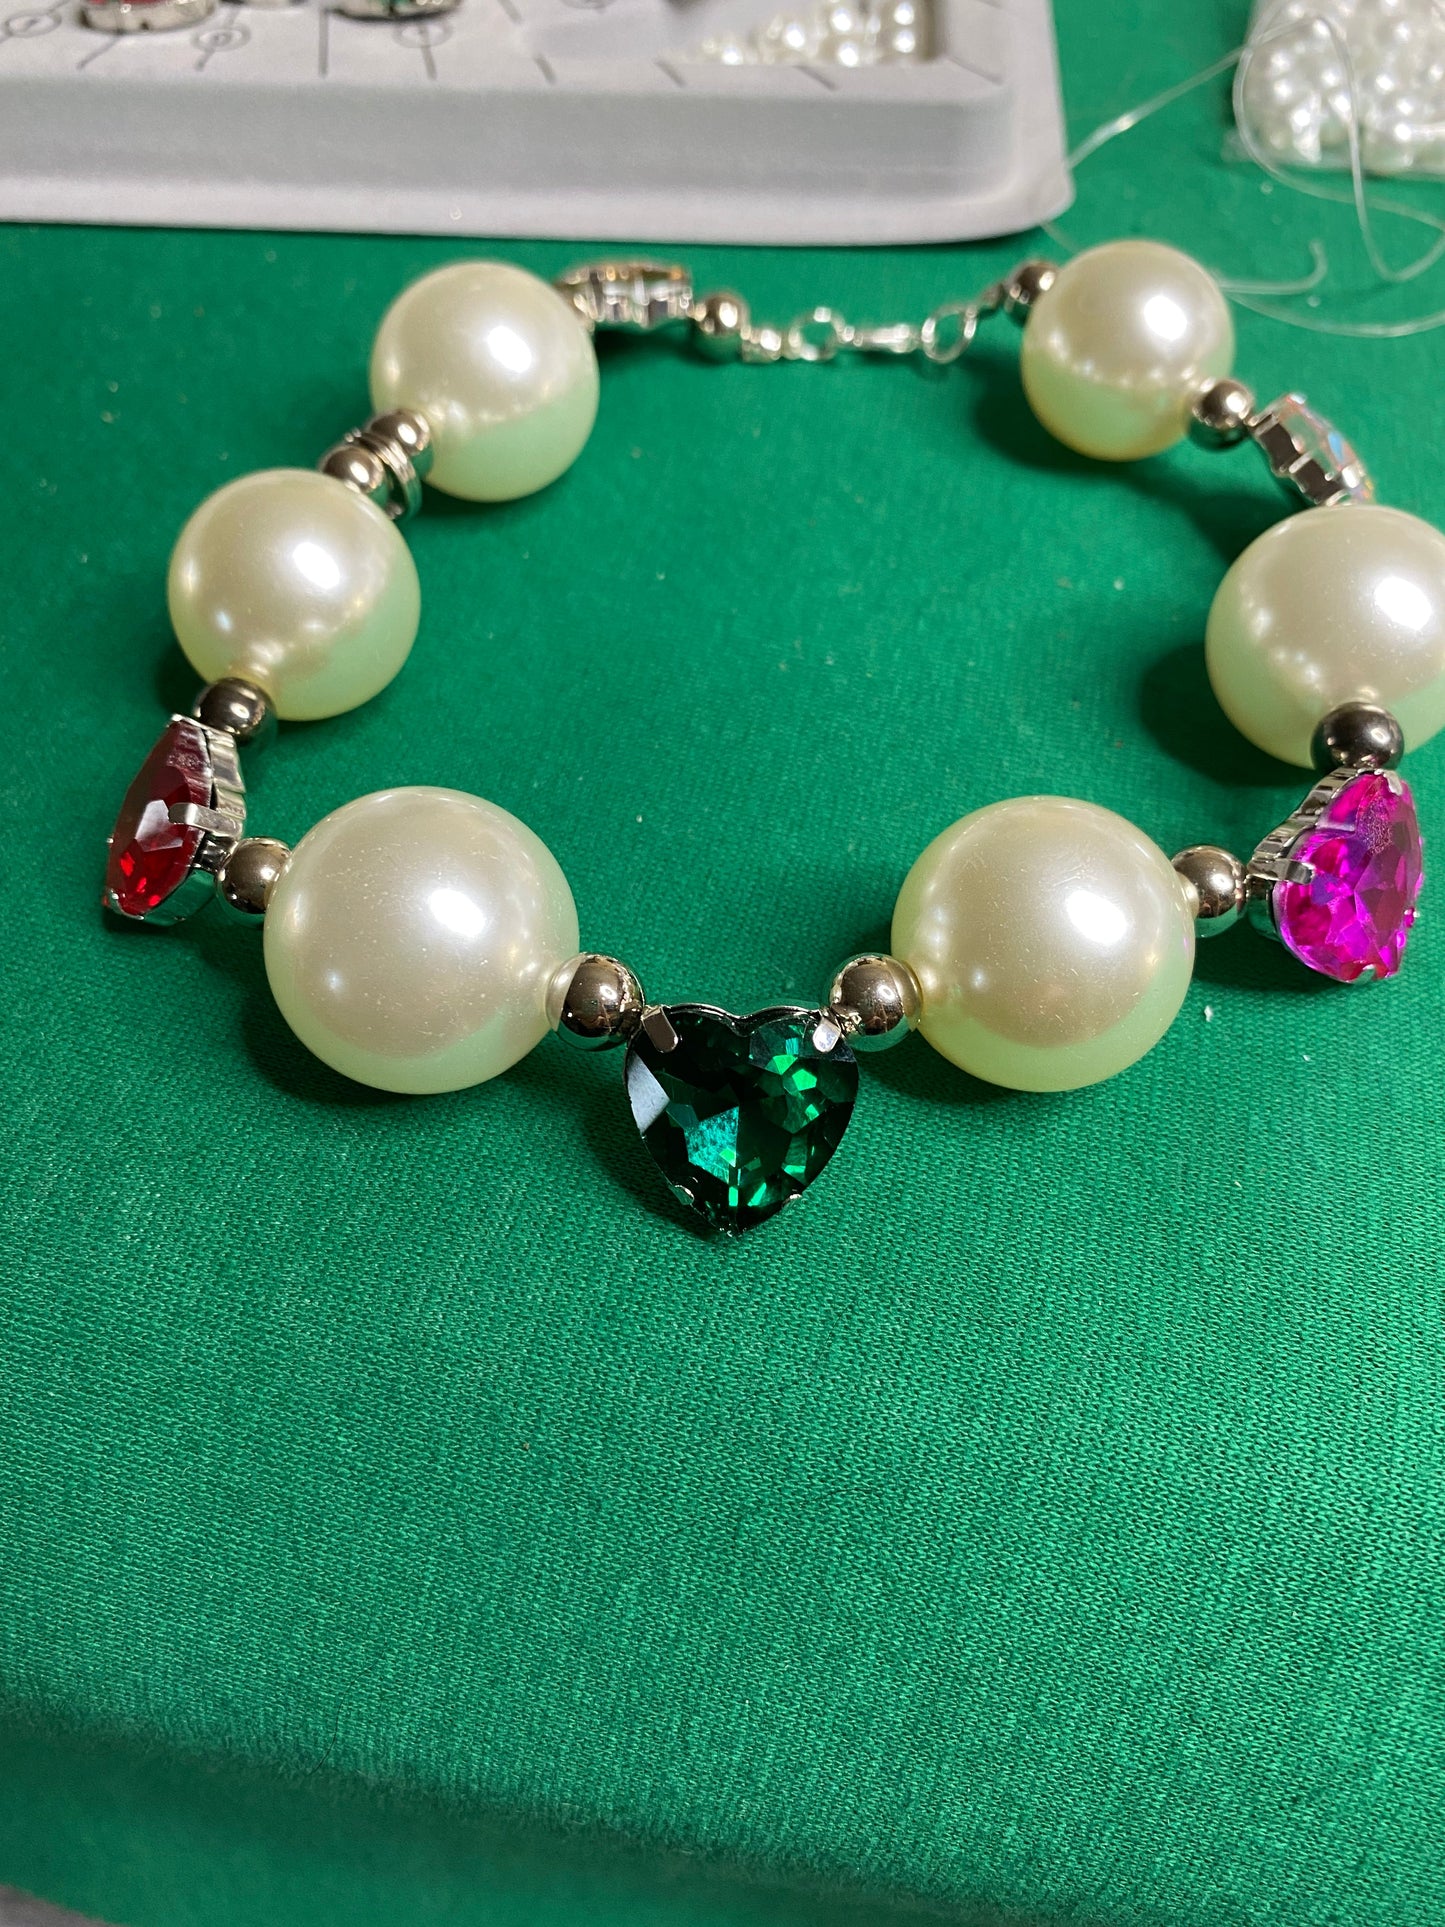 Necklace with Big Pearls and Heart-shaped semiprecious stones. Handmade with love for your pet.